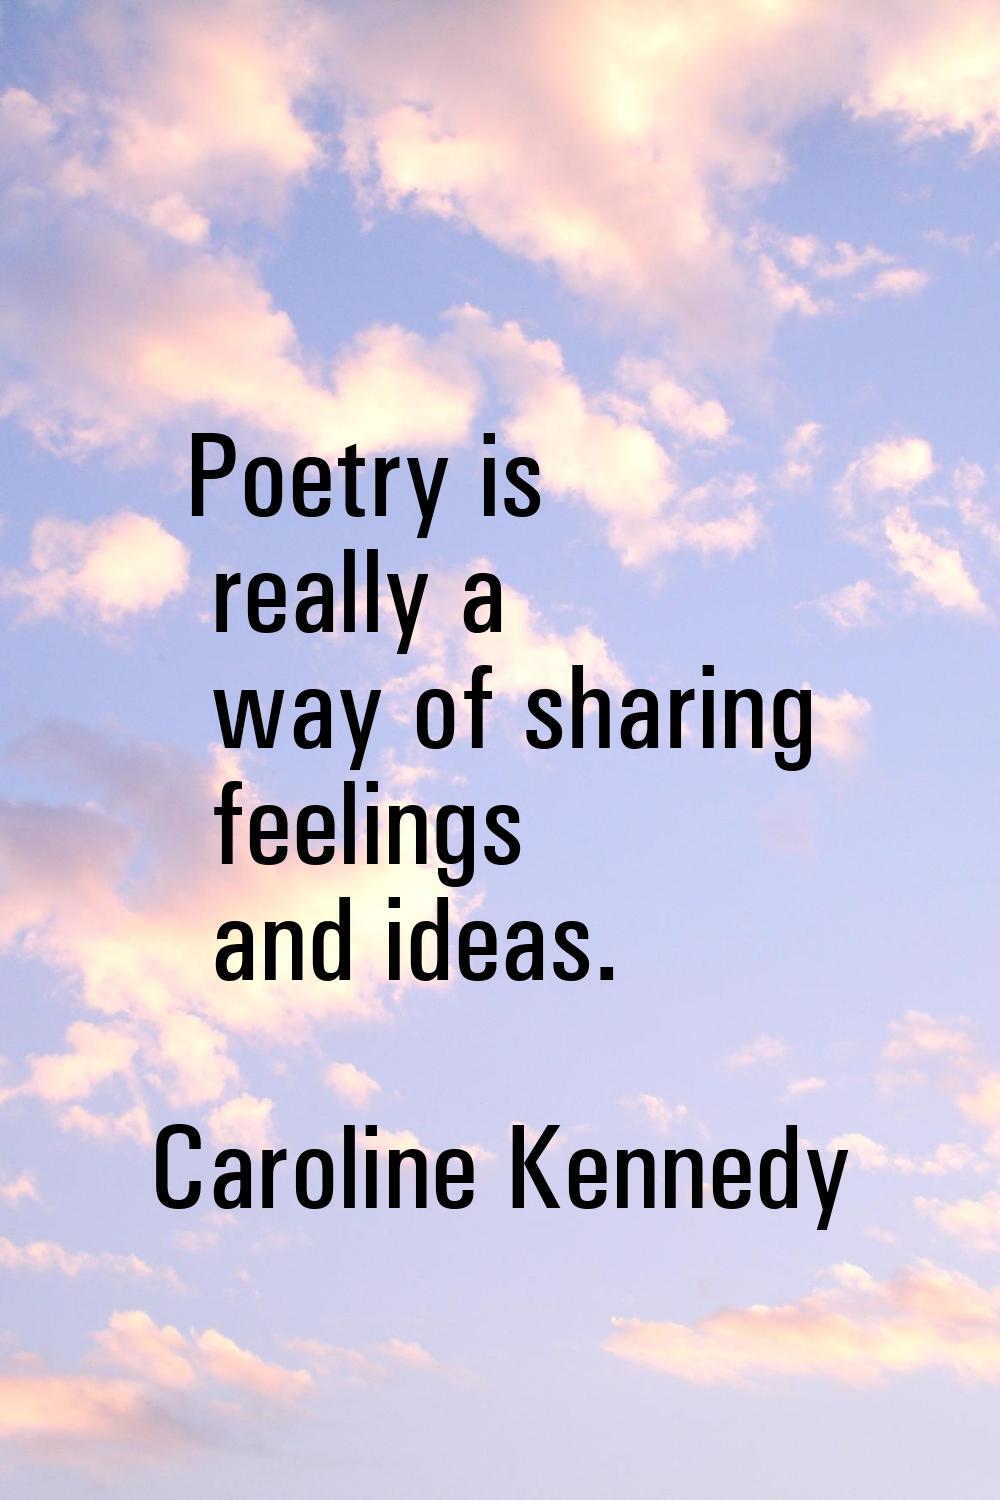 Poetry is really a way of sharing feelings and ideas.